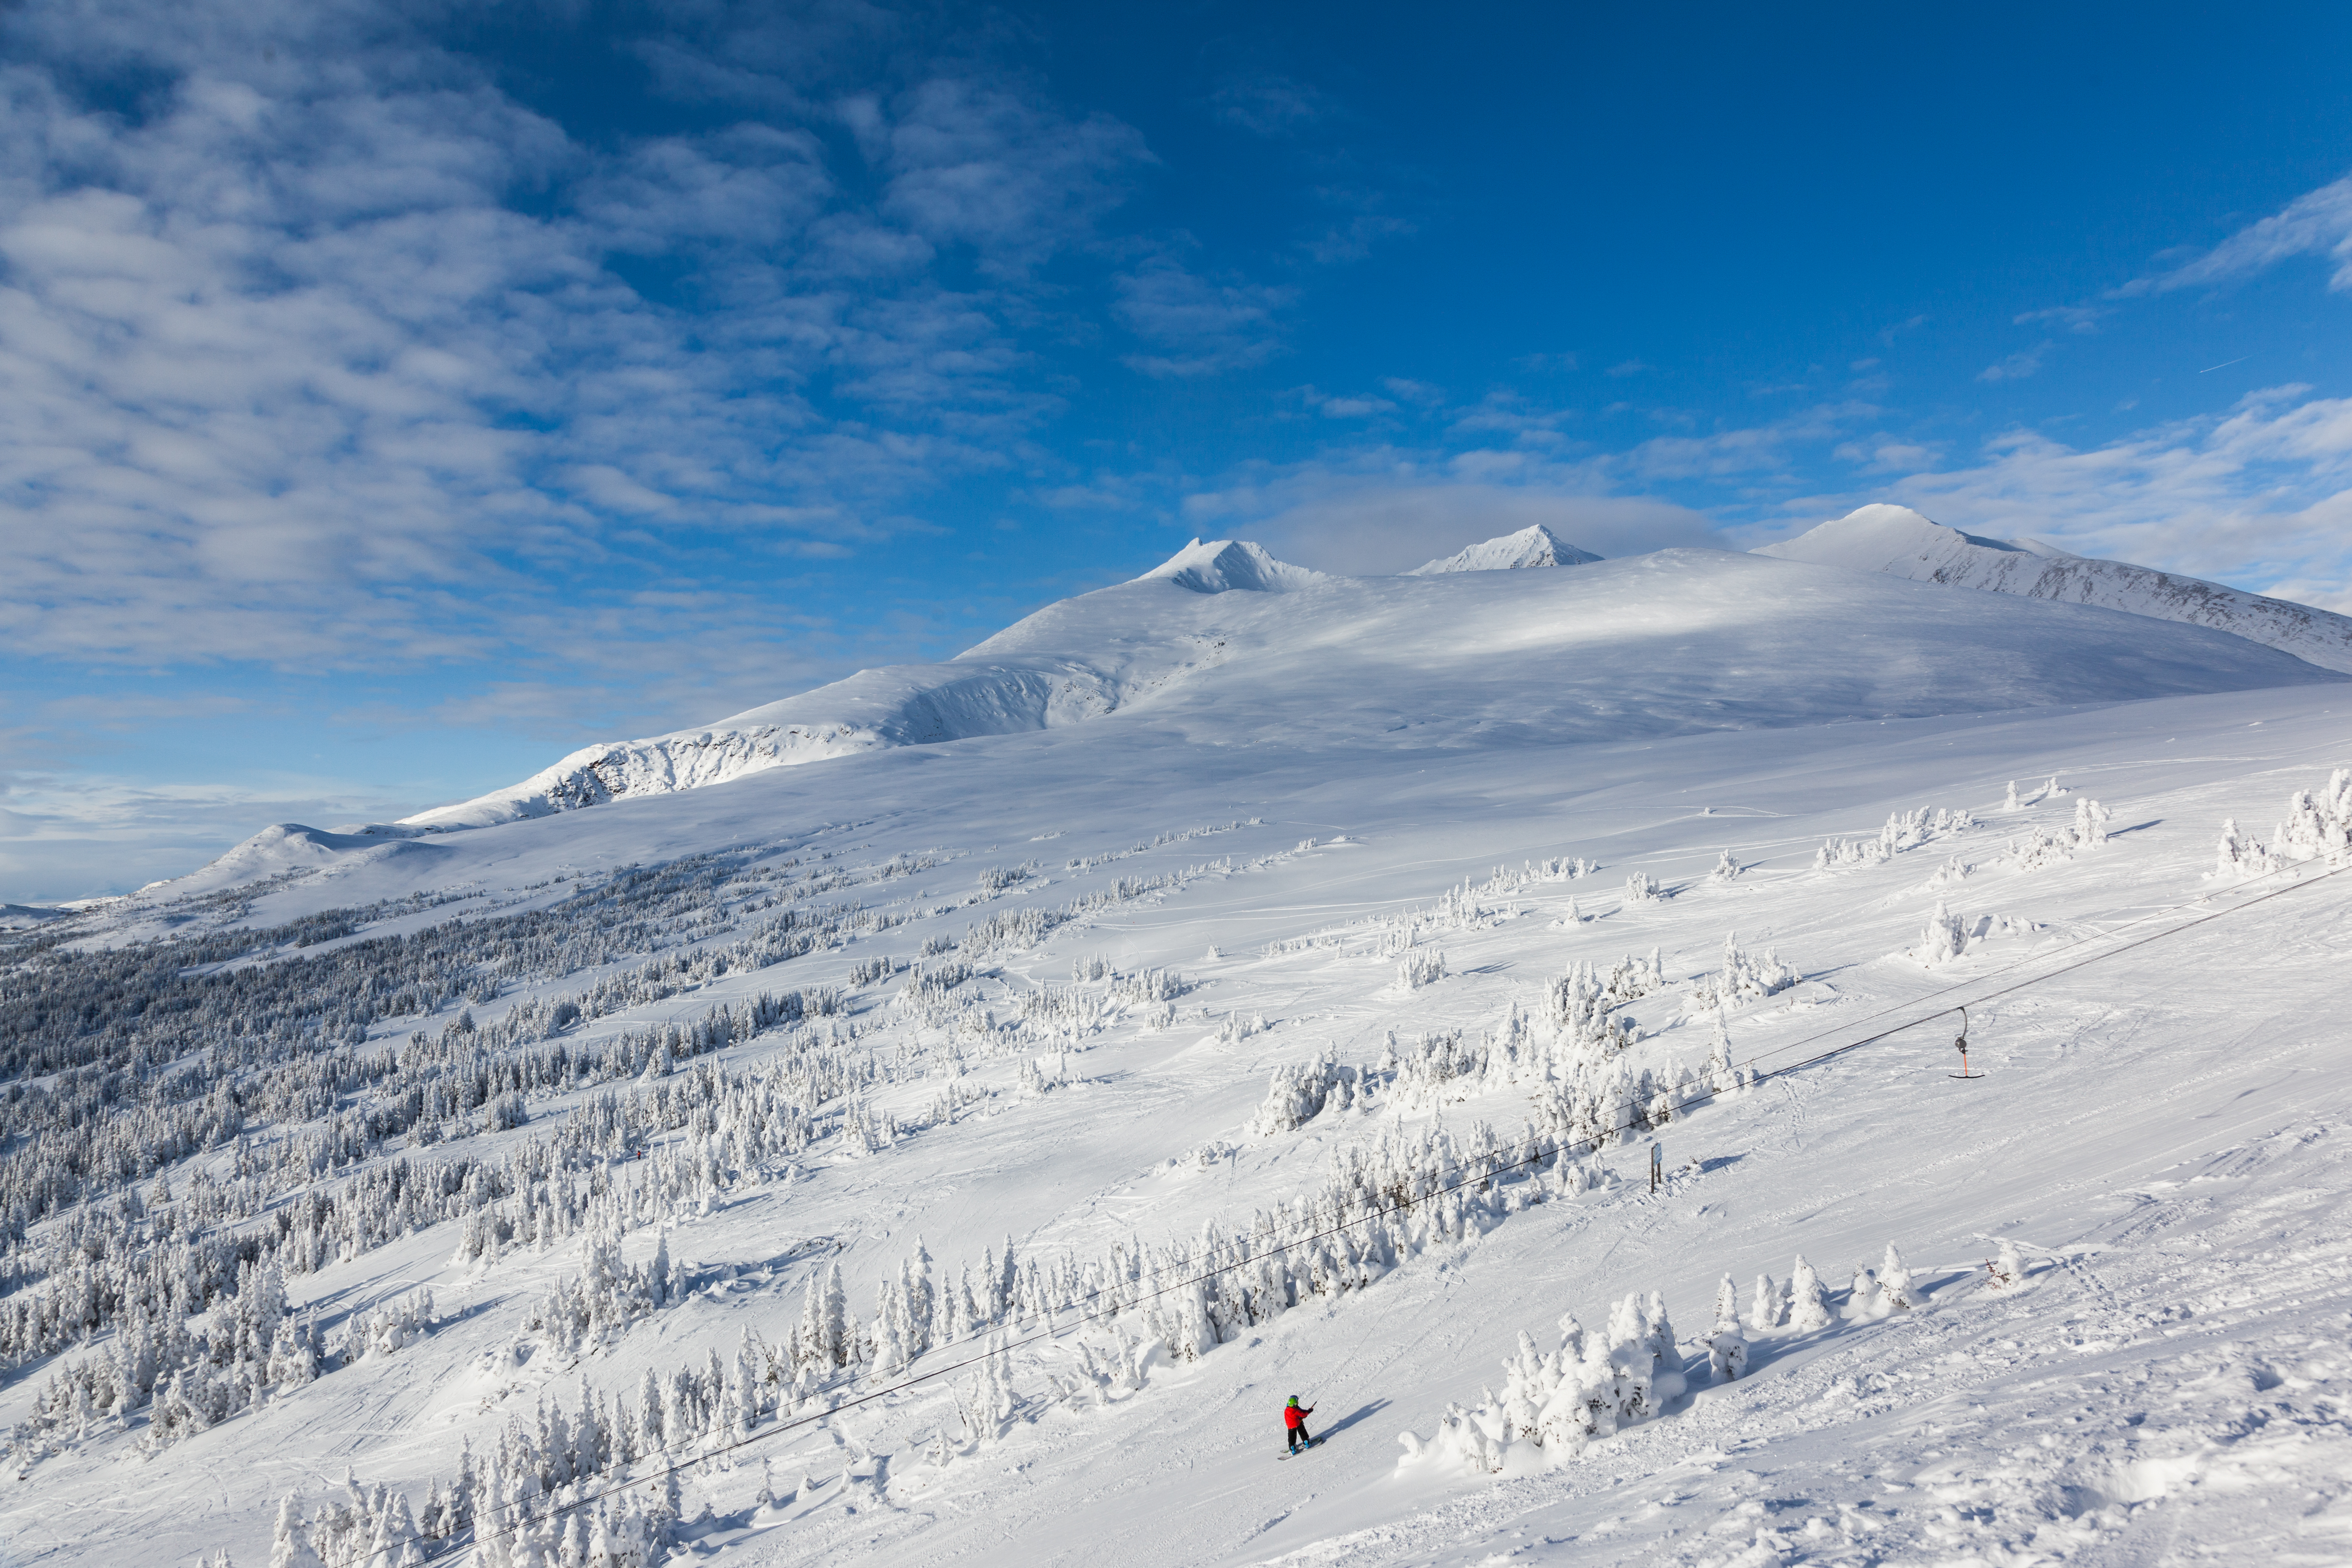 The peaks of Hudson Bay Mountain near Smithers. Photo: Curtis Cunningham